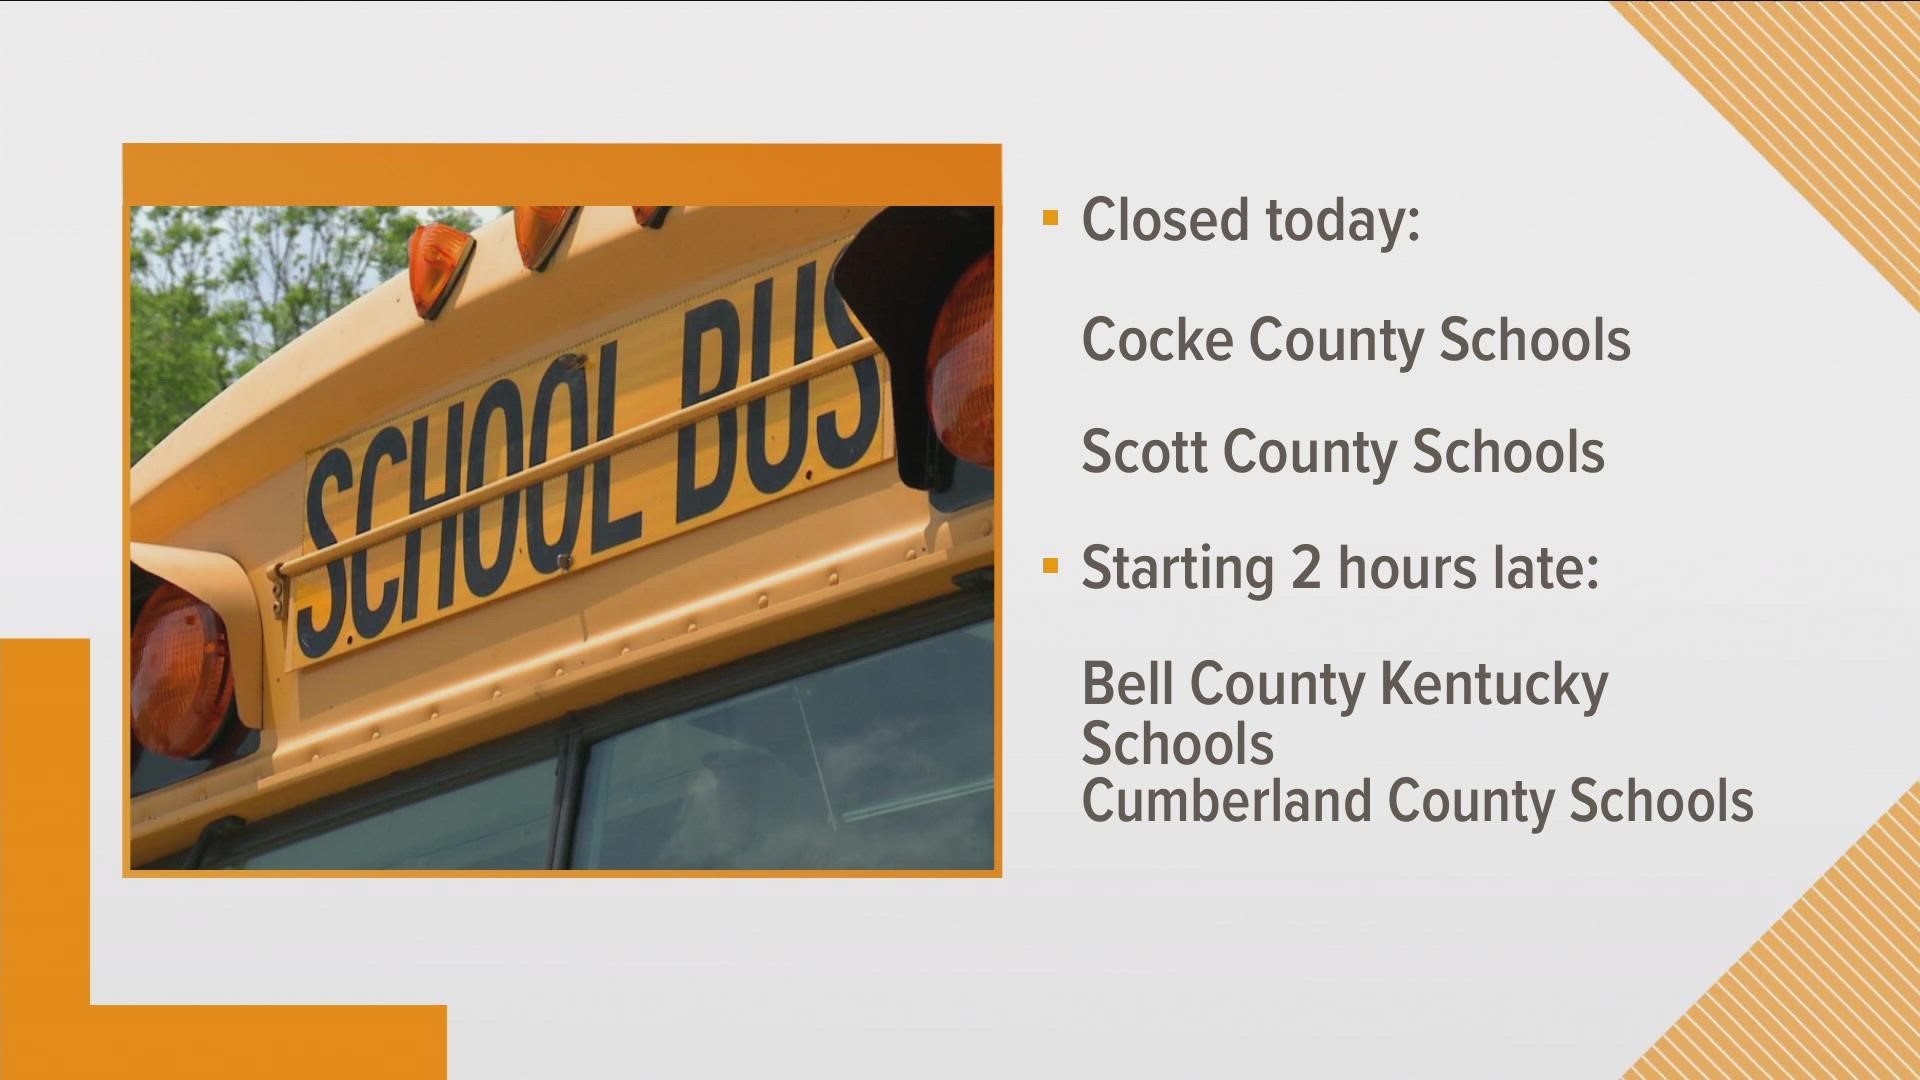 Here are the schools that are closed on Monday, January 31.